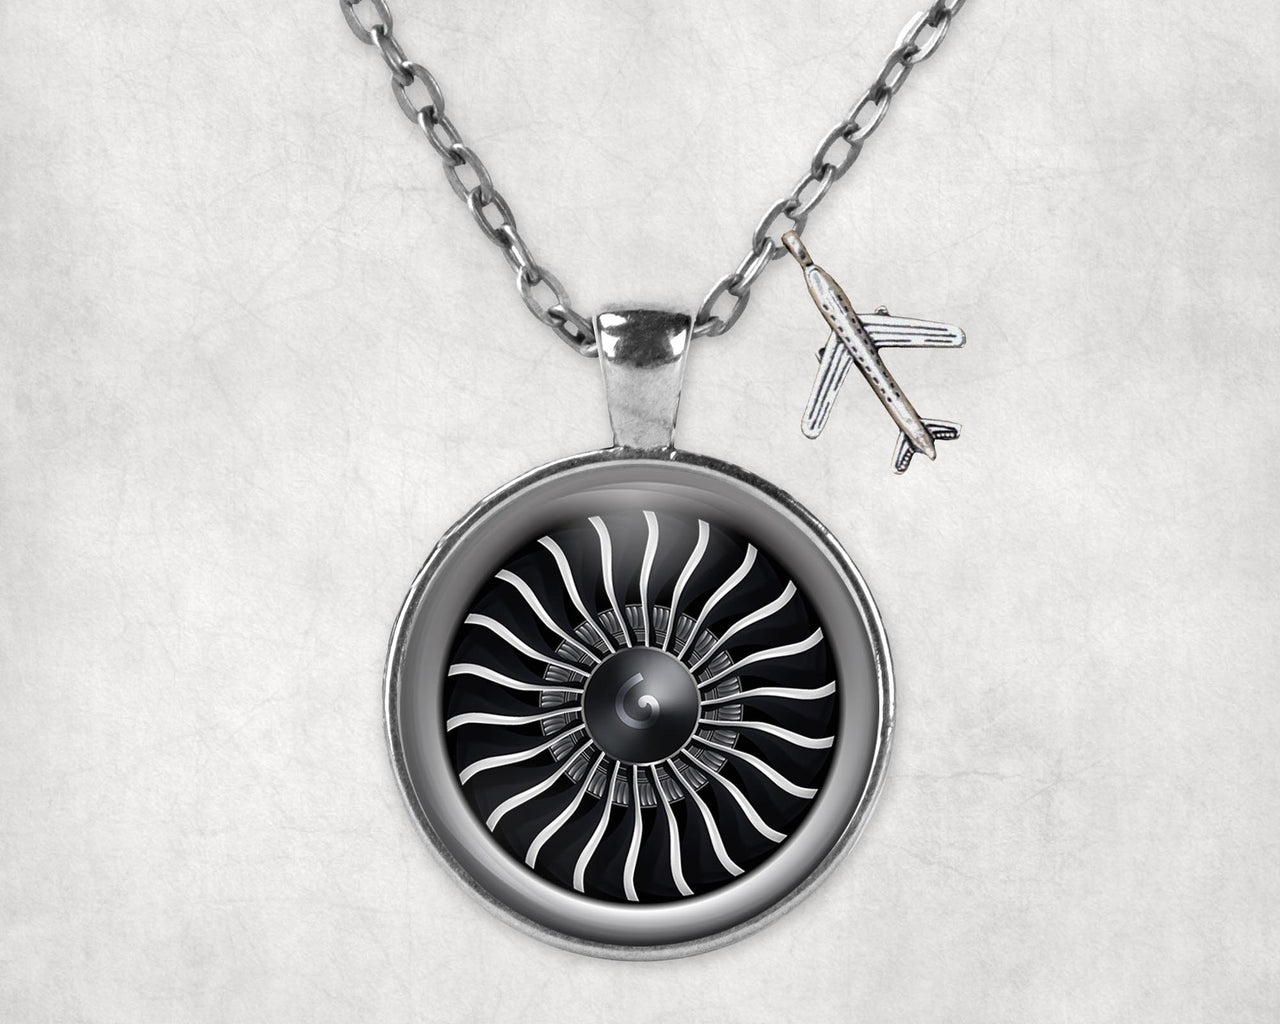 Graphical Jet Engine Designed Necklaces